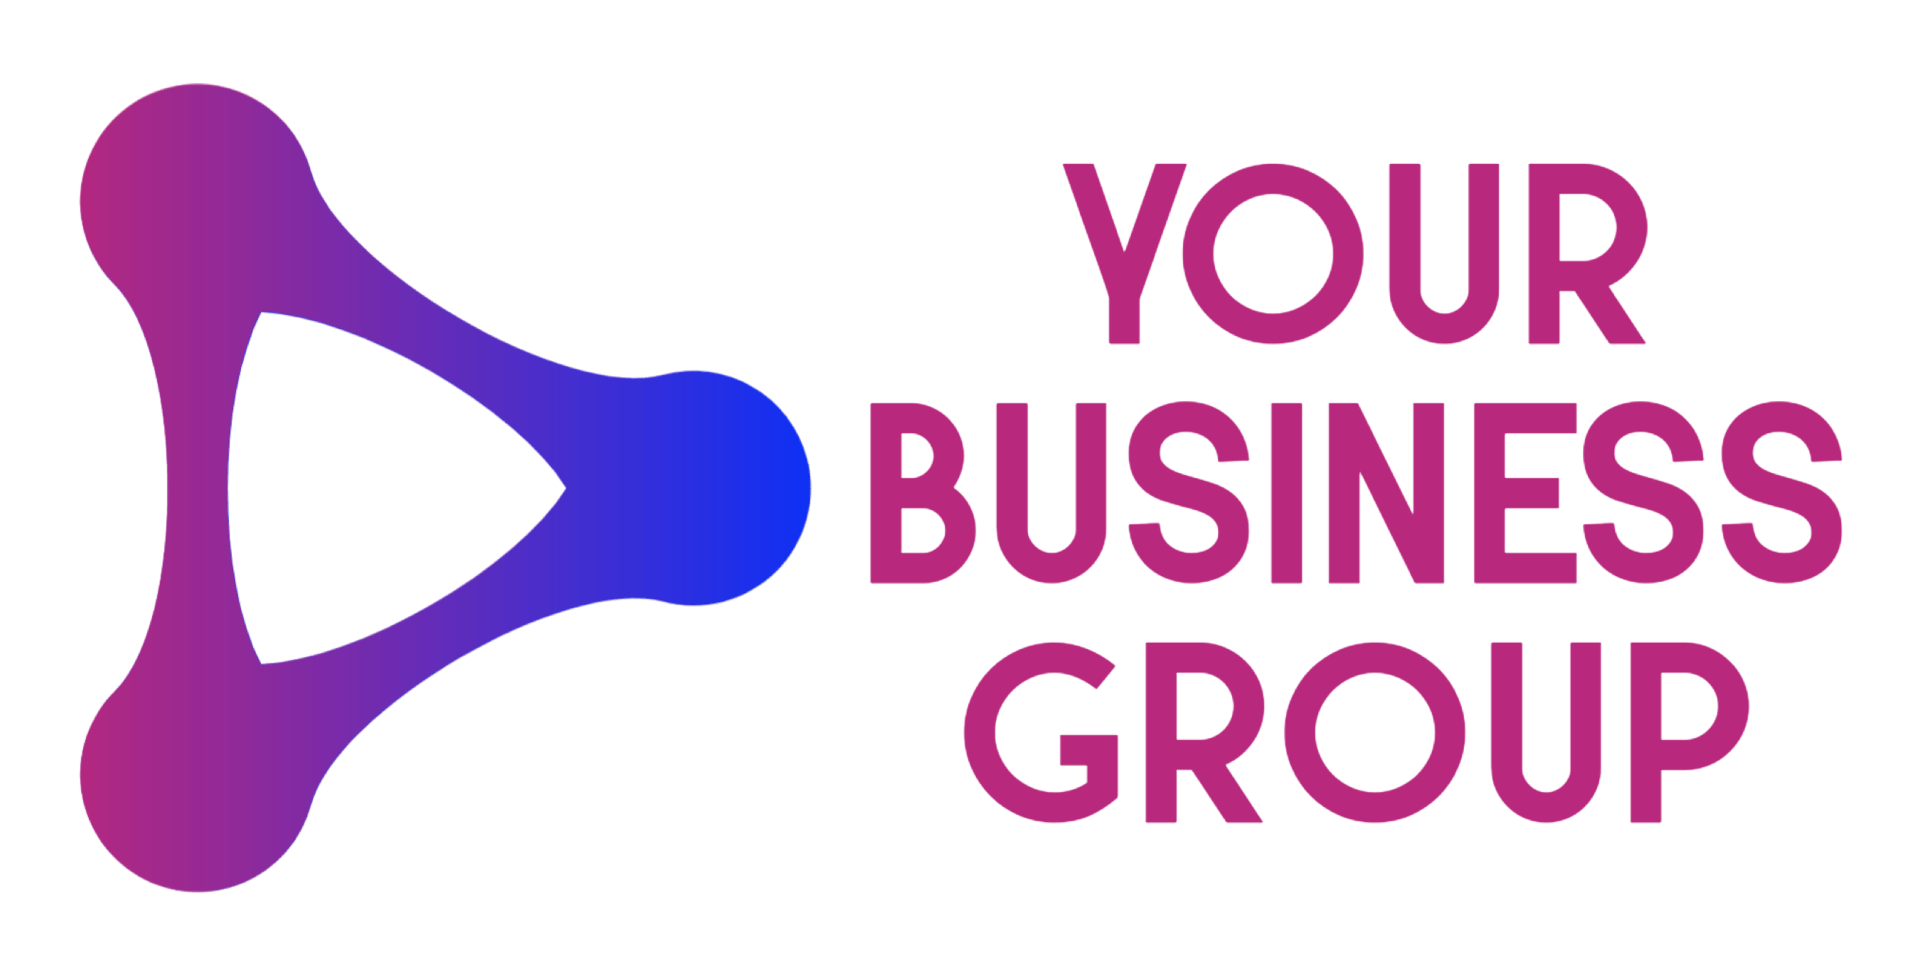 The logo for your business group is purple and blue and says `` your business group ''.